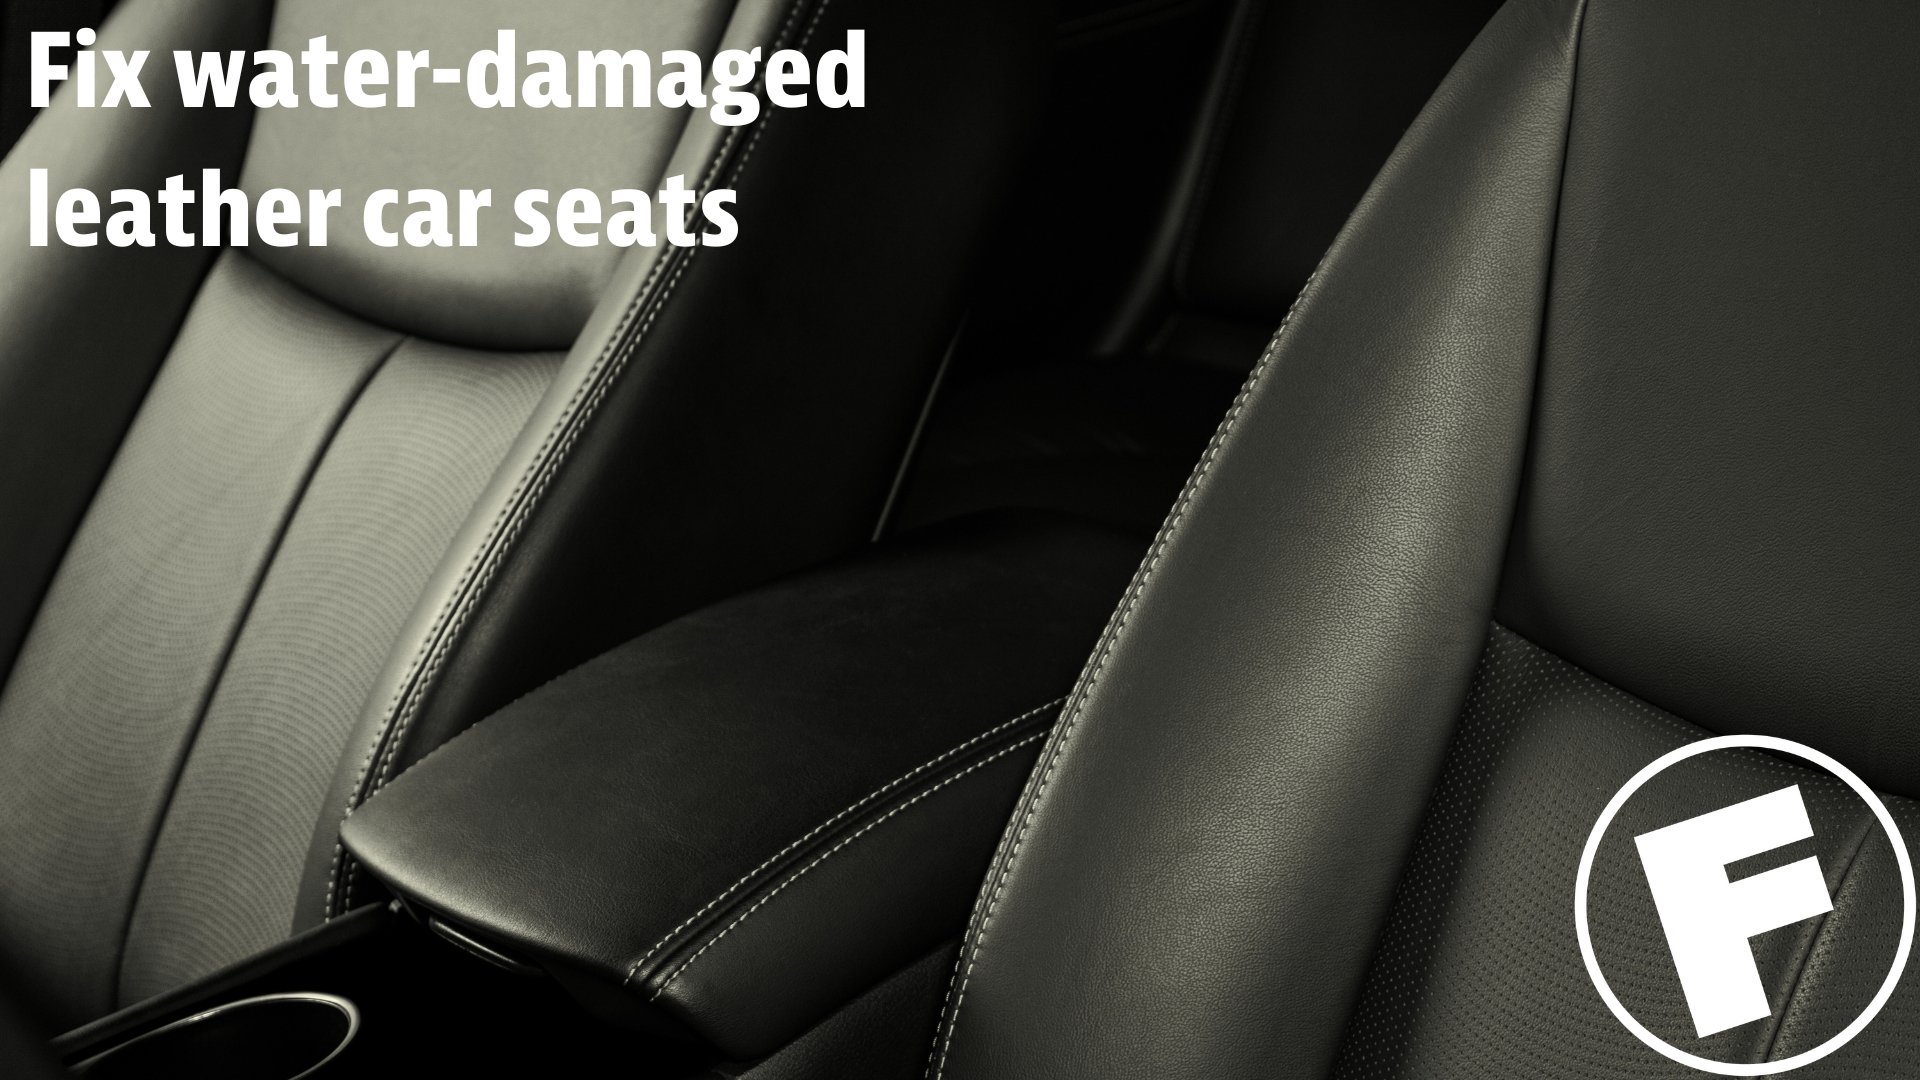 How To Clean Leather Car Seats At Home Easily?